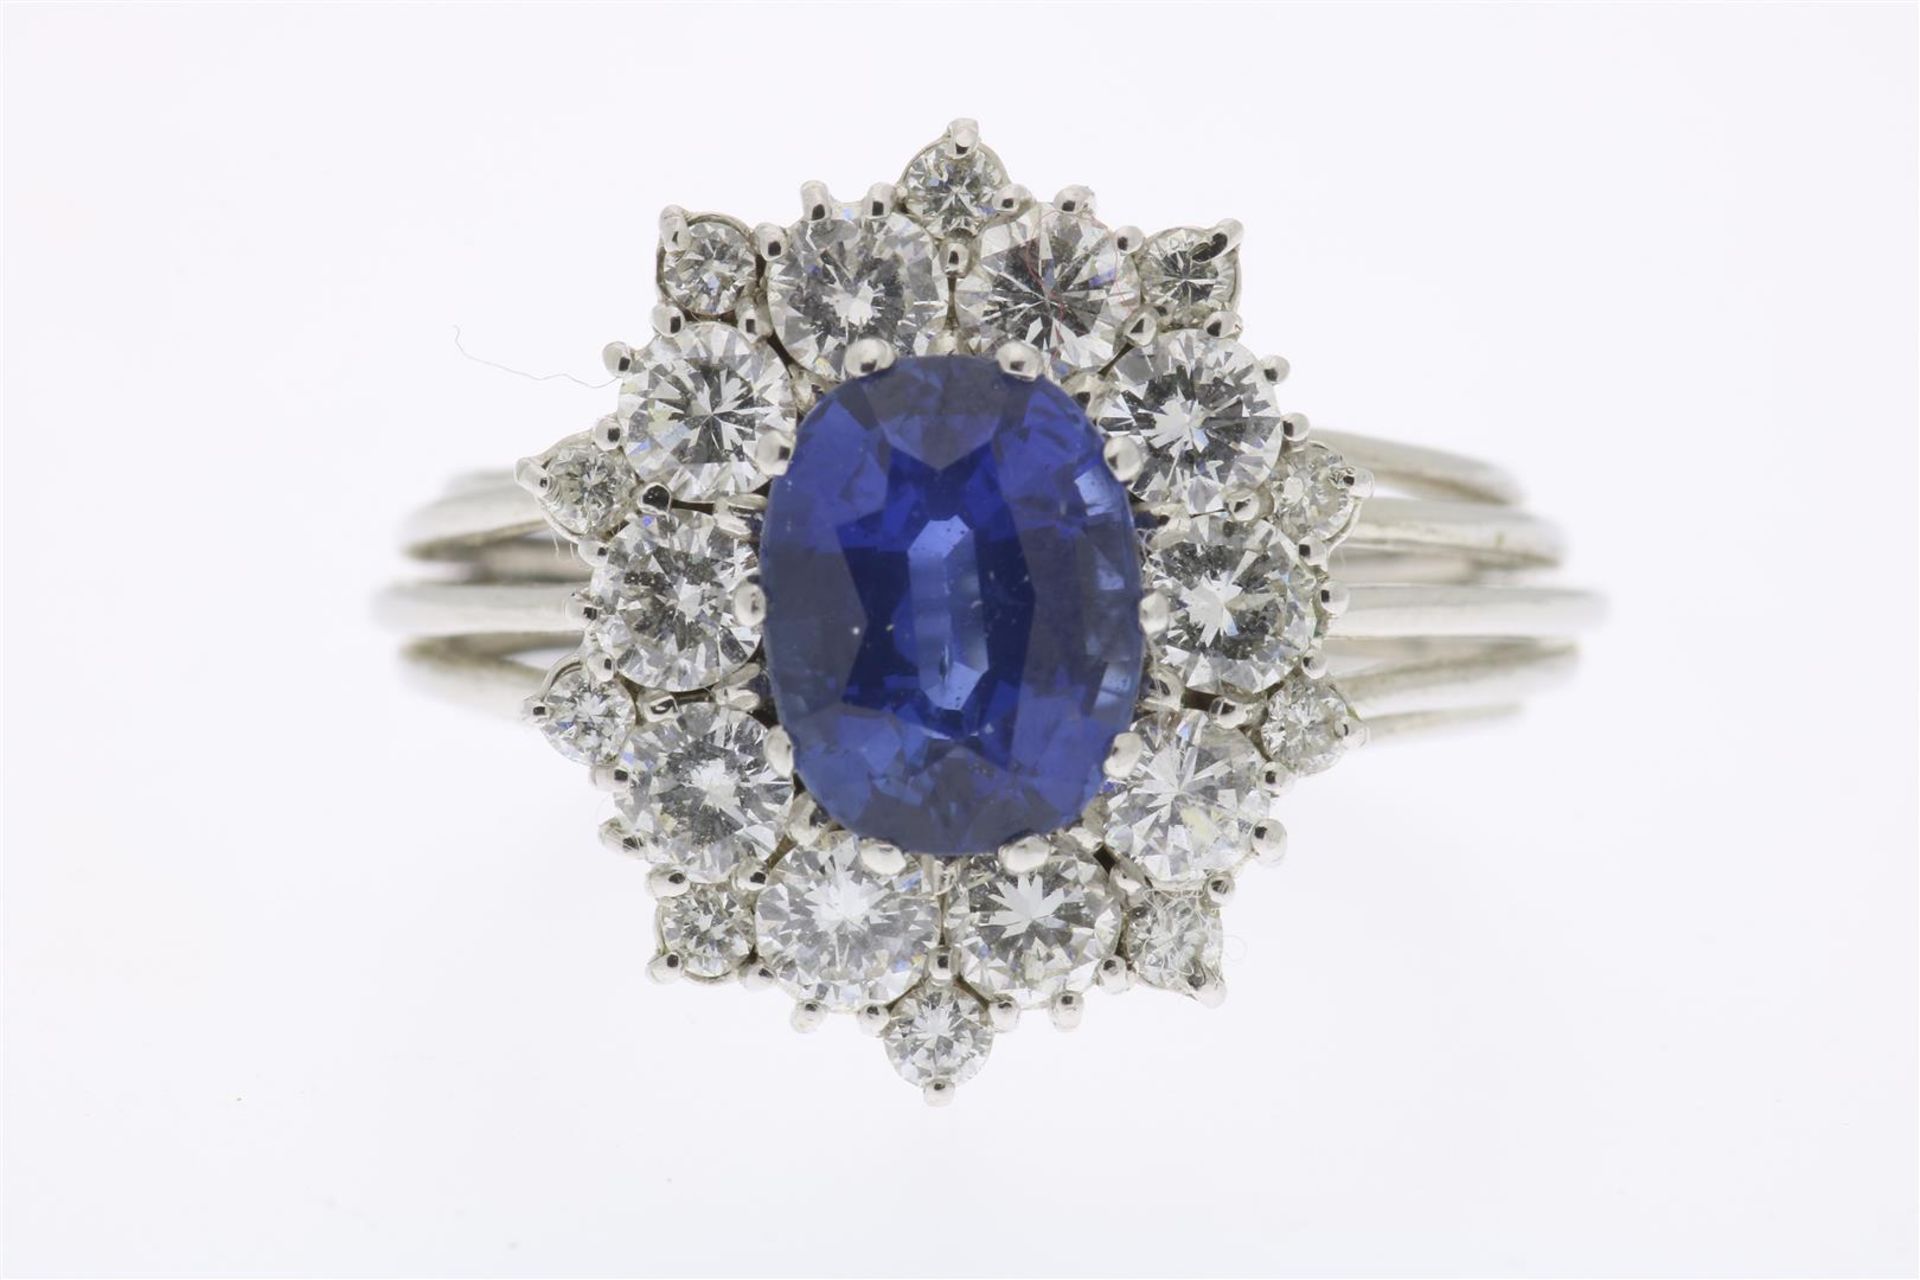 White gold entourage ring set with blue sapphire and brilliant cut diamonds